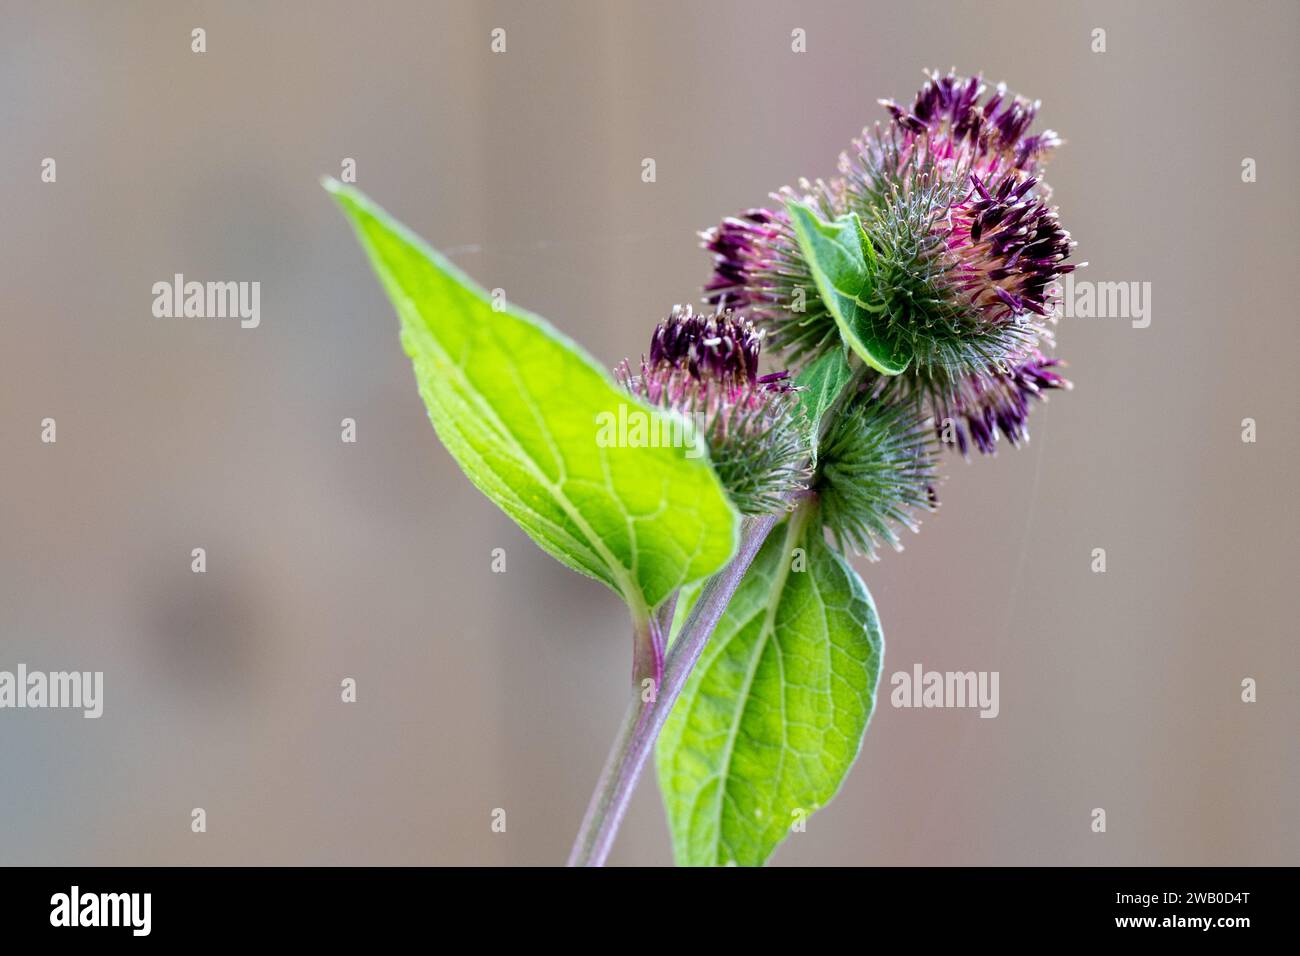 A closeup of a Cirsium Arvense, a milk thistle plant, purple and pink color with long pointy green leaves. The bloom or weed has thorns and needles. Stock Photo